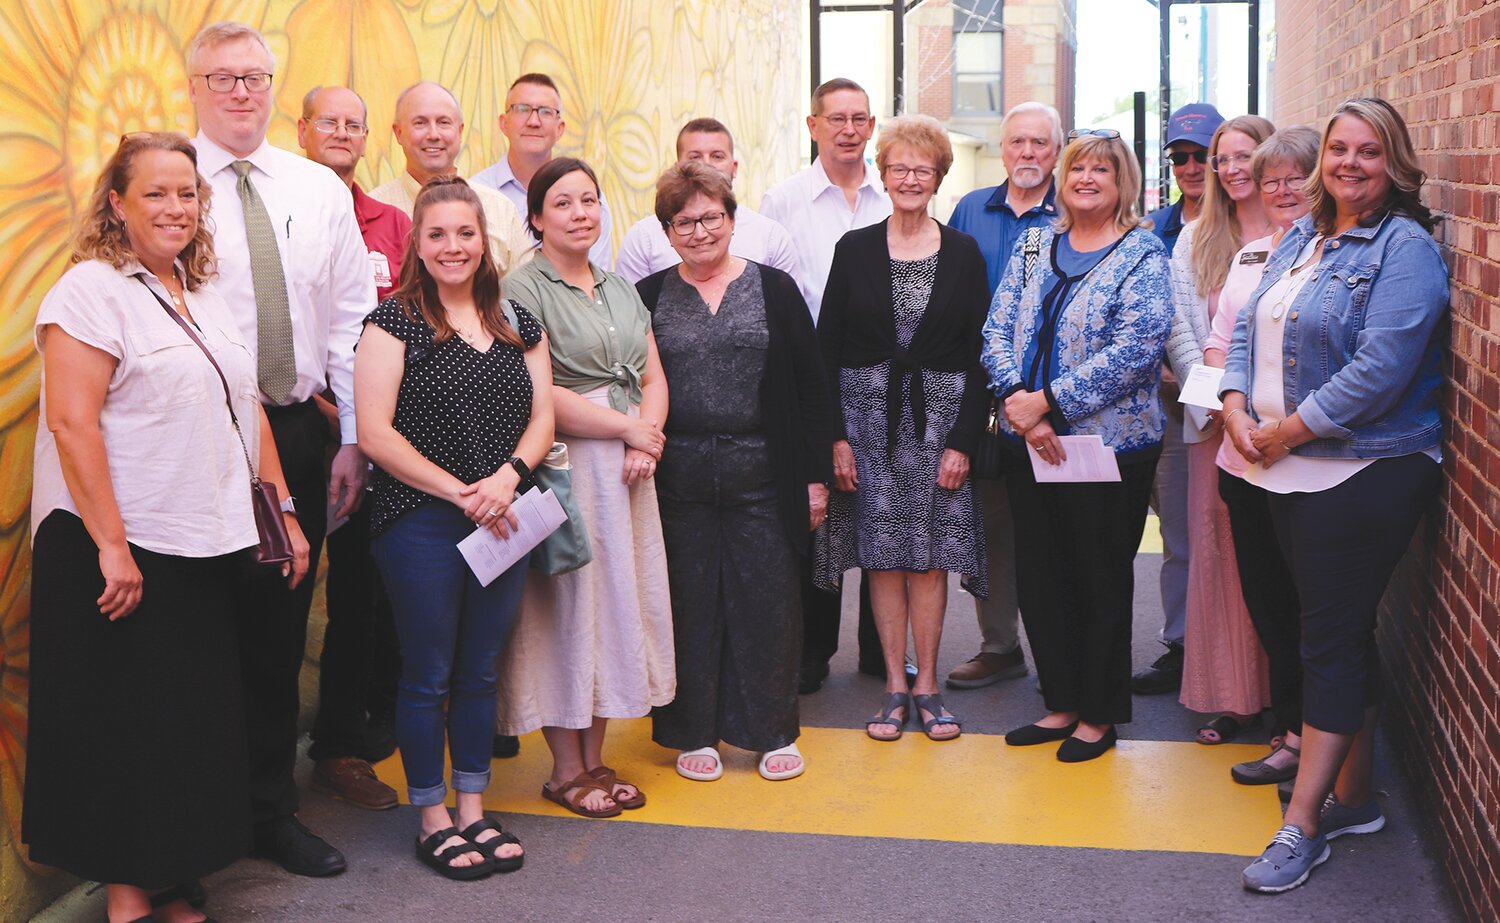 Pictured are several representatives from local organizations that received grant money from the Montgomery County Community Foundation during its first grant cycle of the year.